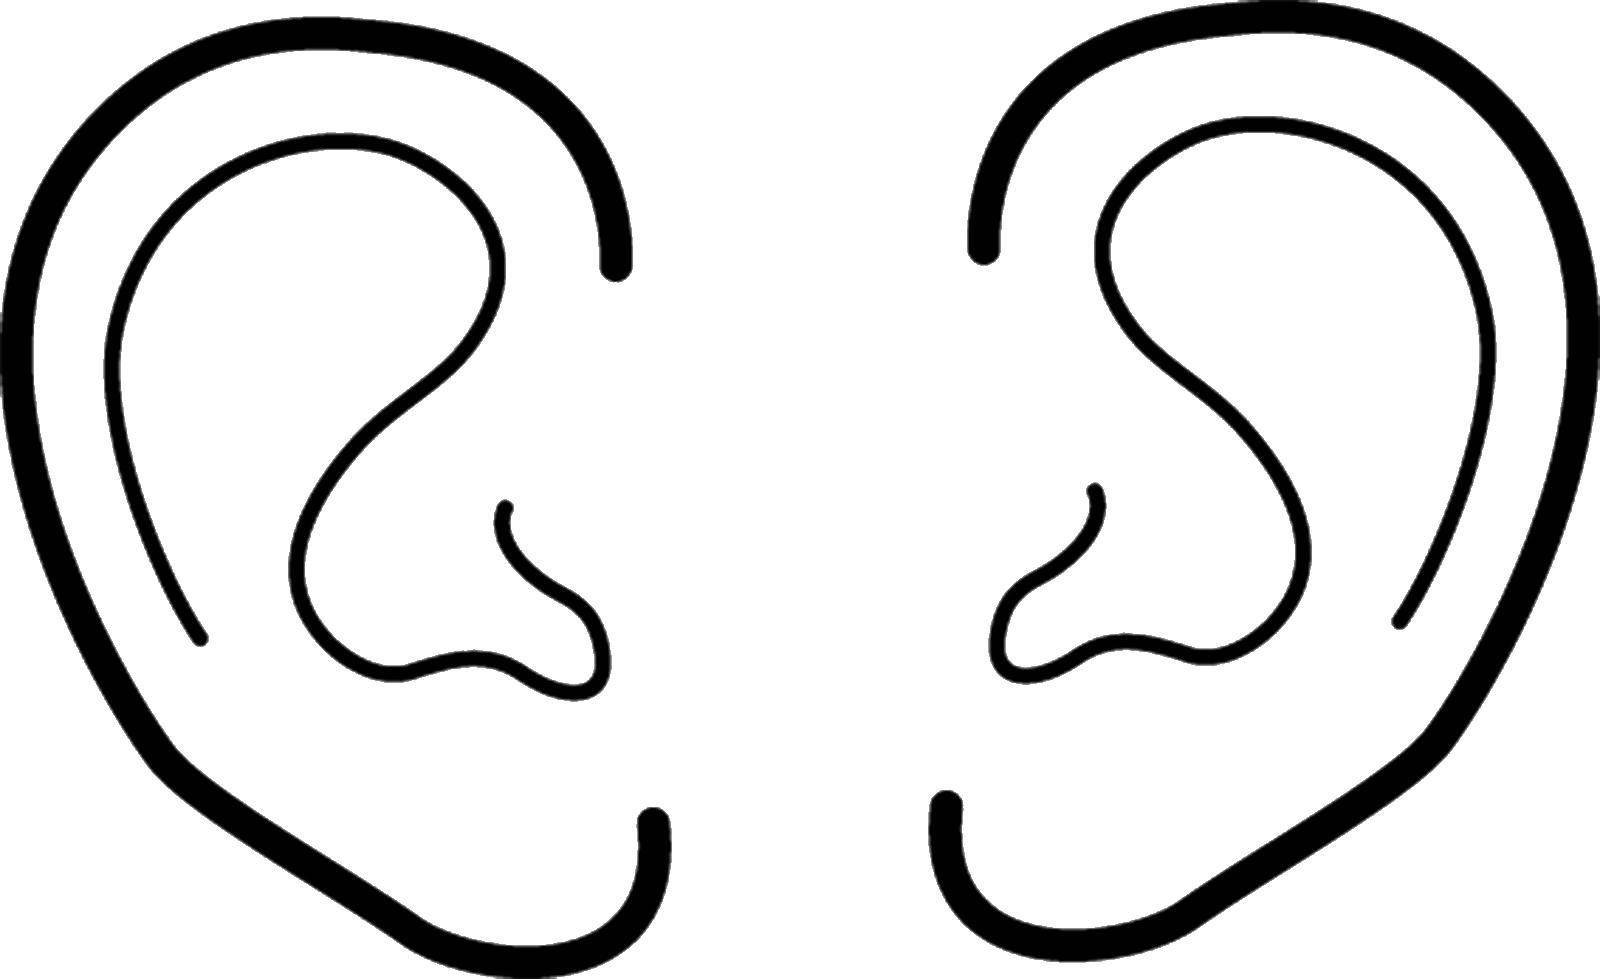 Coloring Ears. Category body. Tags:  body parts, ears.